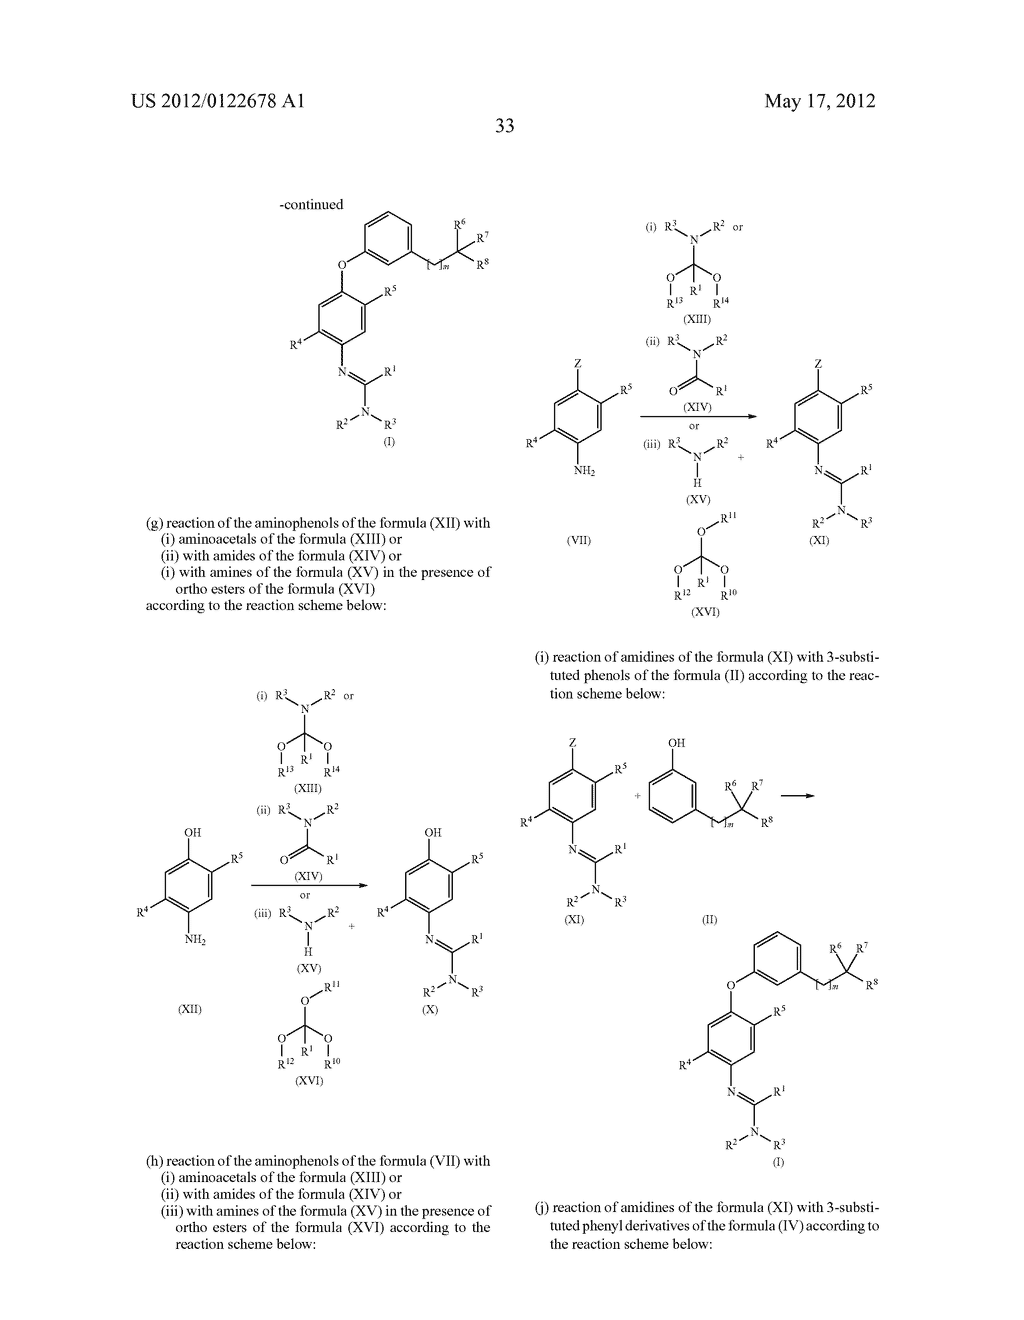 PHENOXY SUBSTITUTED PHENYLAMIDINE DERIVATIVES AND THEIR USE AS FUNGICIDES - diagram, schematic, and image 34